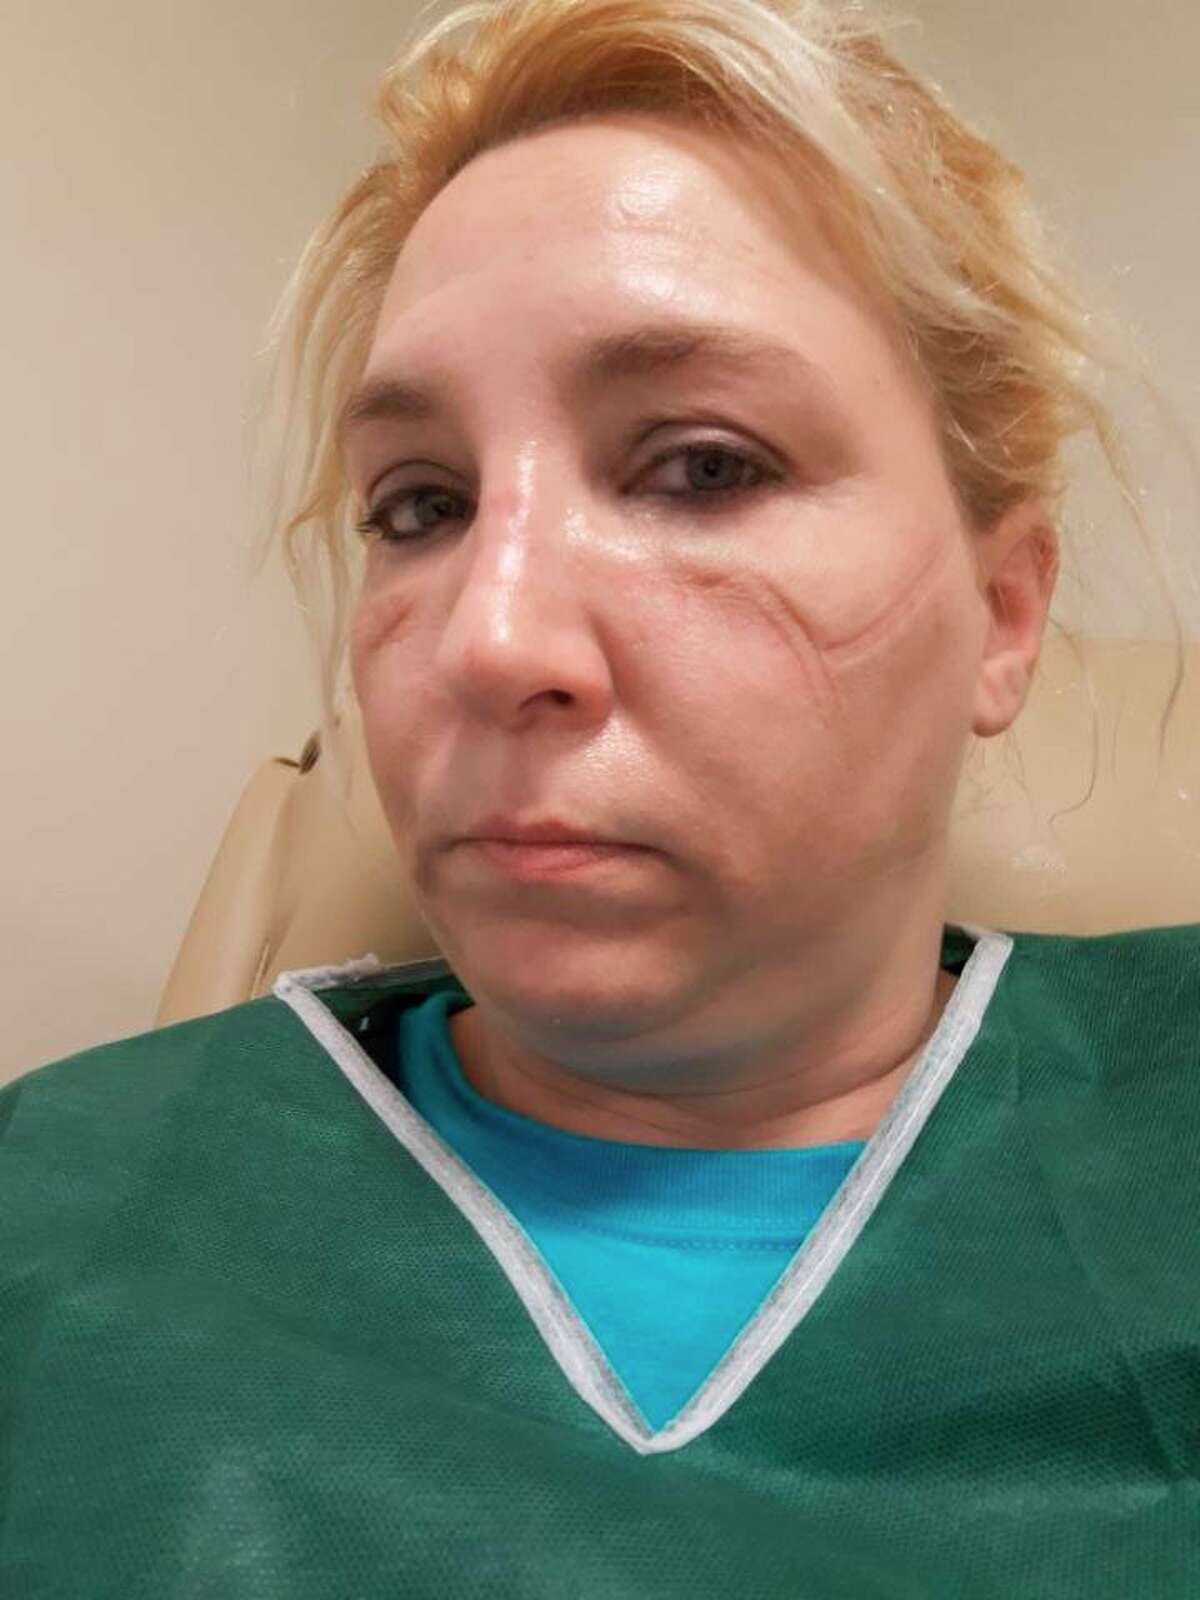 Joy Kohlhoff is pictured with imprints from personal protection equipment on her face after a long hospital shift. (Photo provided)